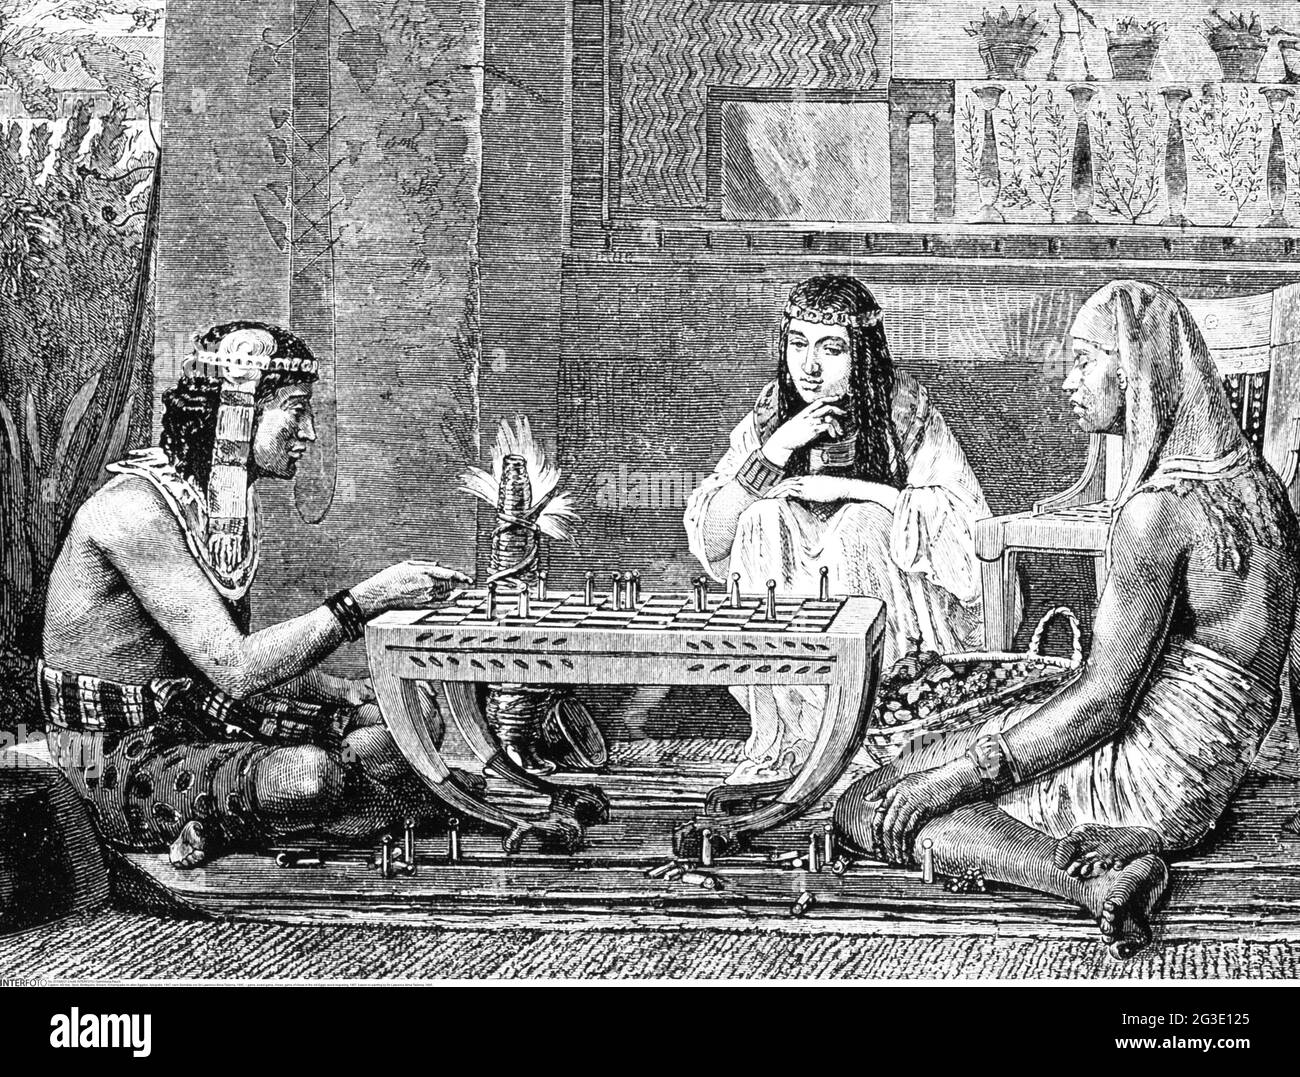 game, board game, chess, game of chess in the old Egypt, wood engraving, 1867, ARTIST'S COPYRIGHT HAS NOT TO BE CLEARED Stock Photo